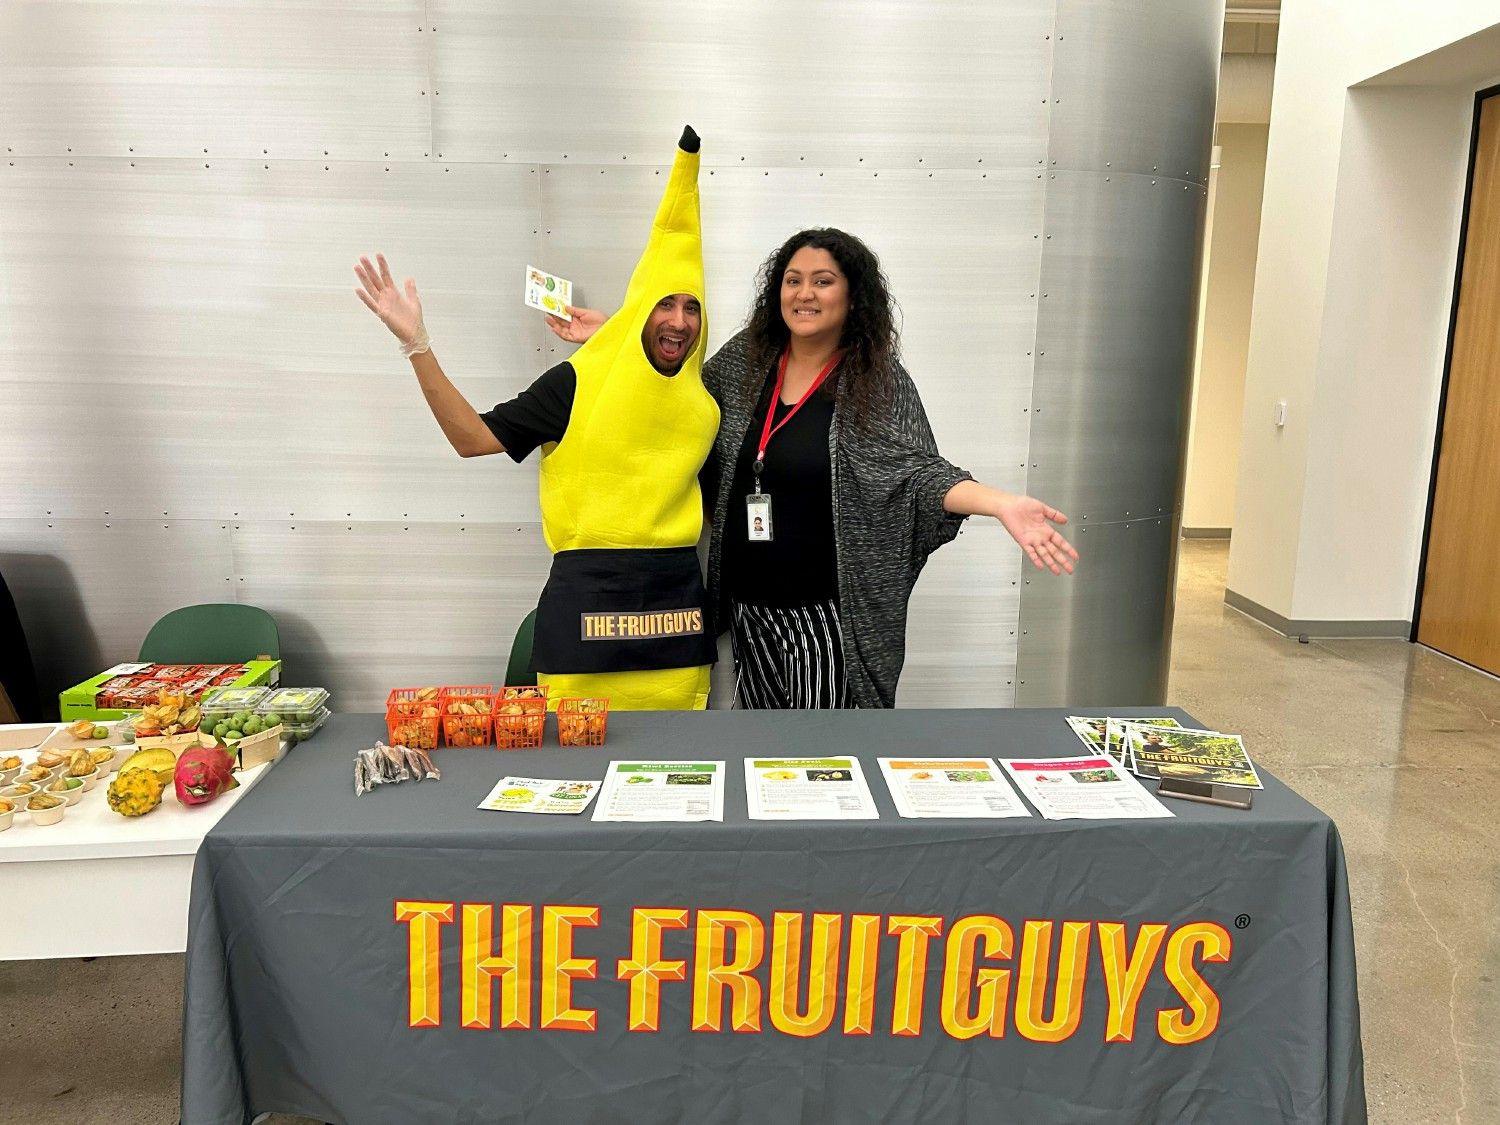 During National Nutrition Month, we brought in The Fruit Guys, to do fresh fruit tasting & nutrition education.